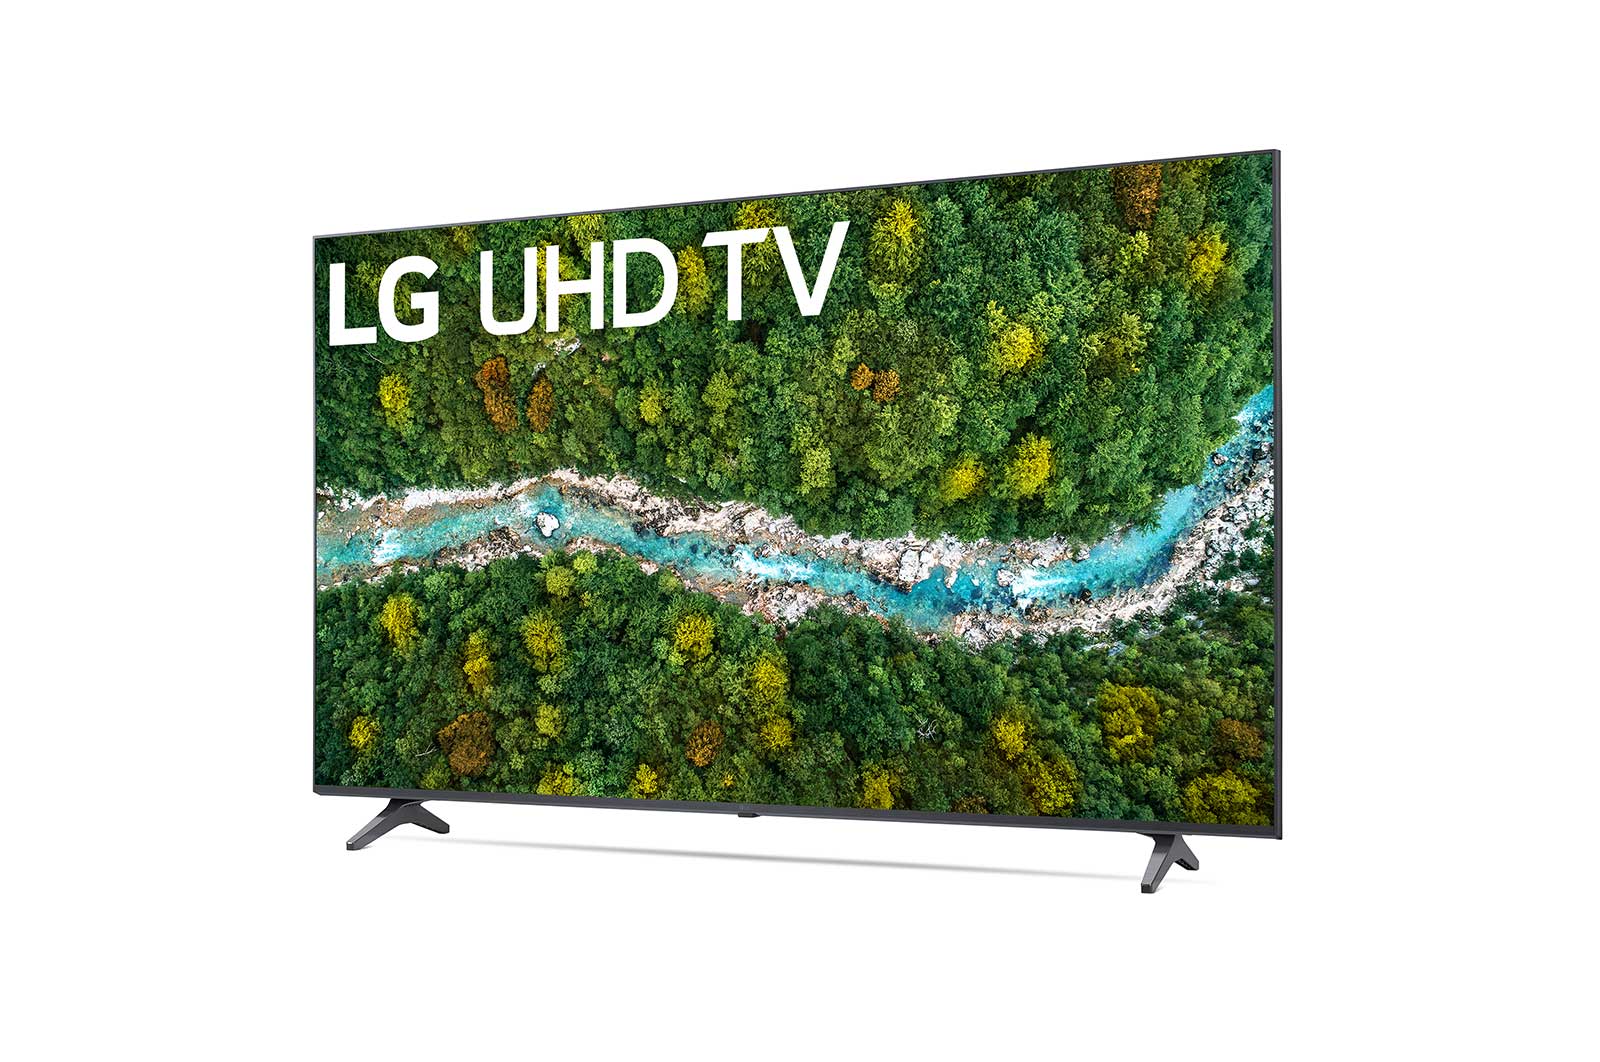 LG Smart TV 43" 4K Smart UHD w/tv wall mount(Refurbished) Tv's ONLY for delivery in San Diego and Tijuana